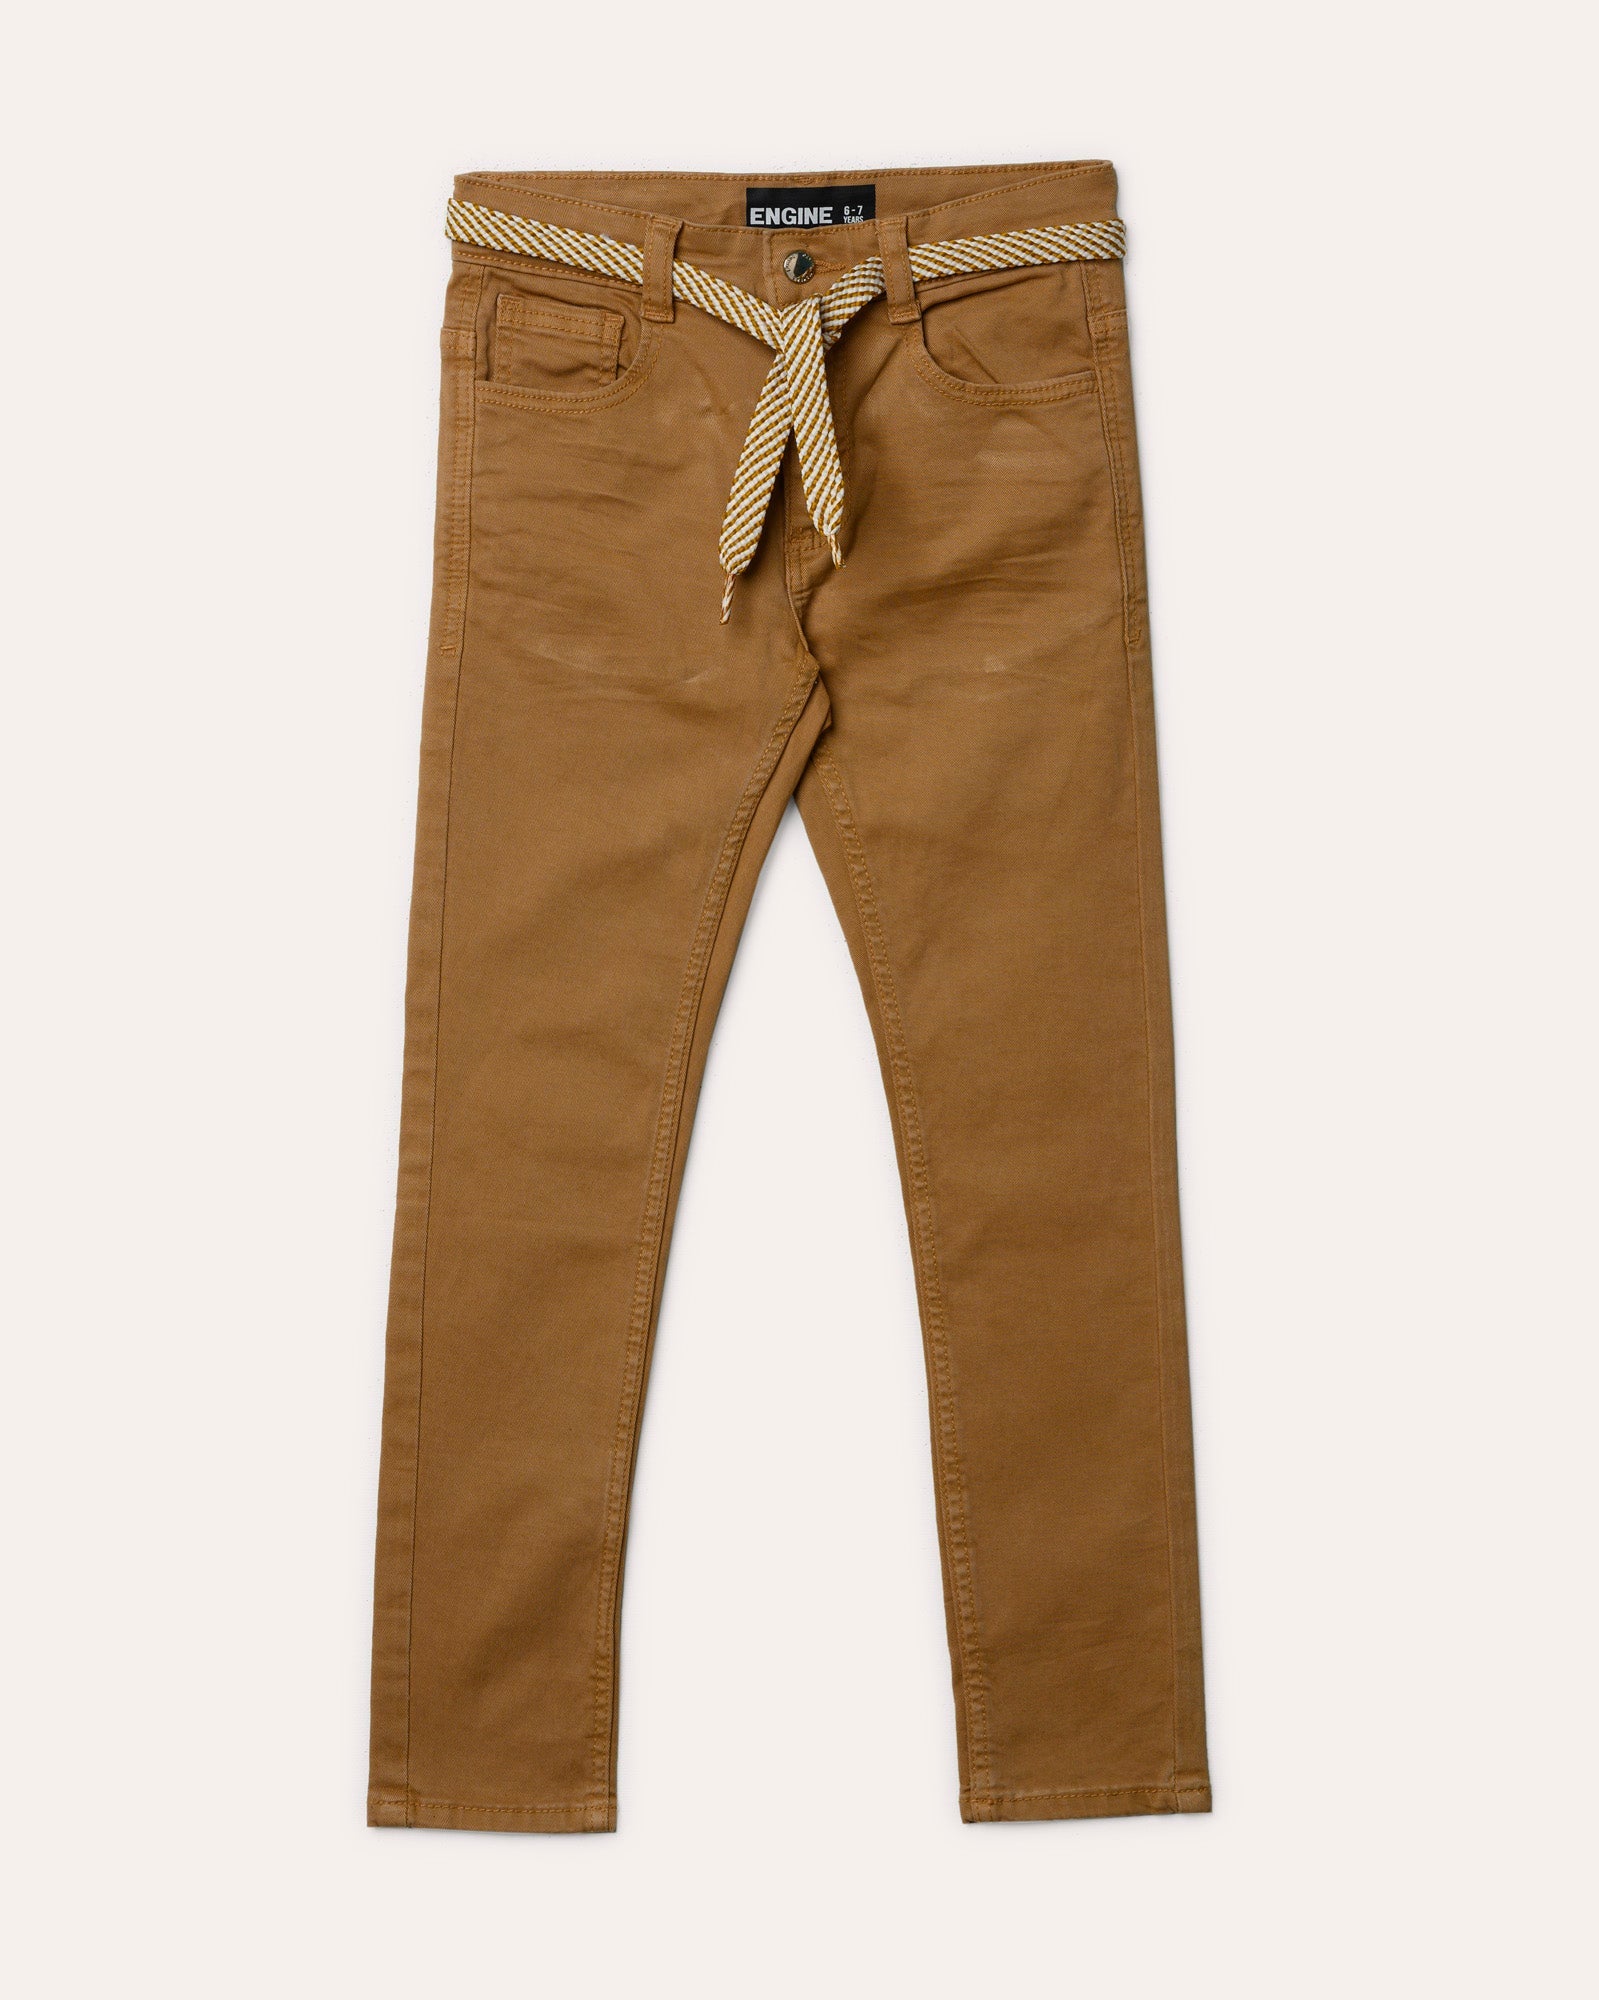 Pant For BOYS - ENGINE